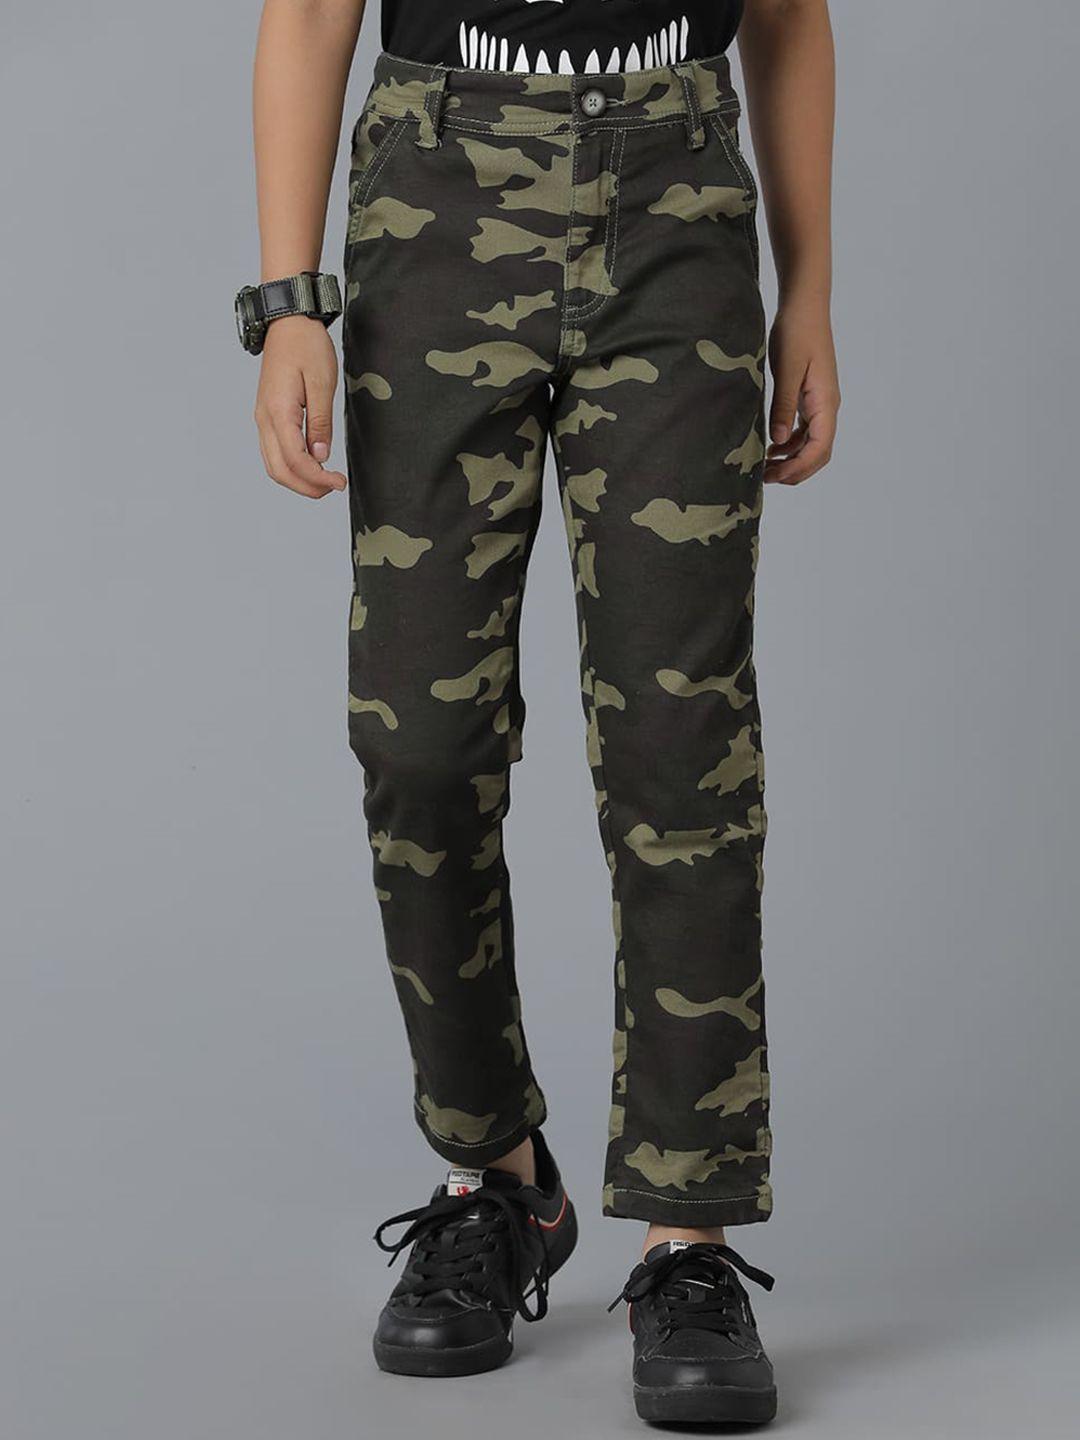 under-fourteen-only-boys-camouflage-printed-cotton-cargos